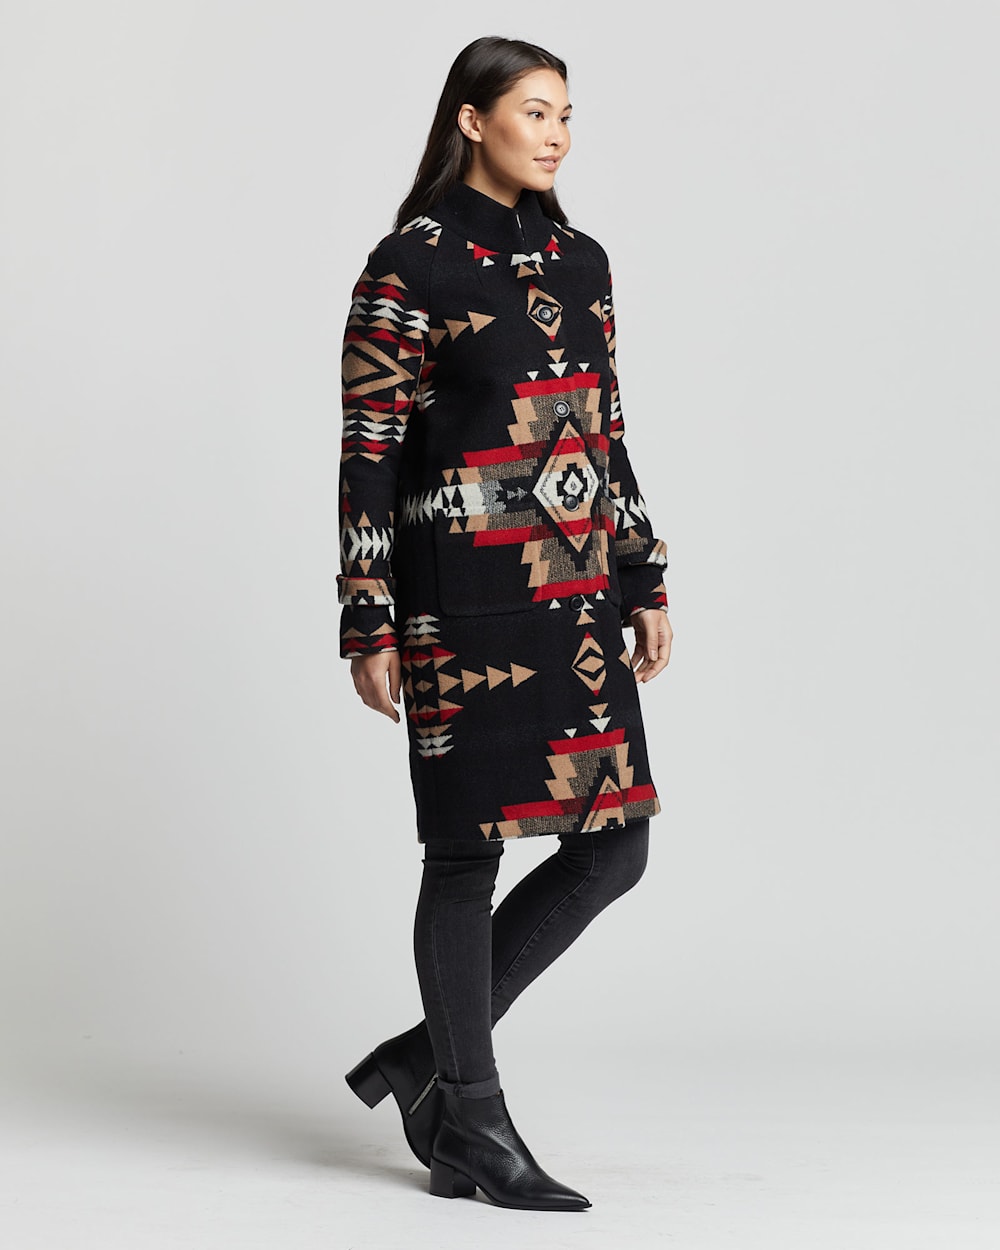 ALTERNATE VIEW OF WOMEN'S ROCK POINT ARCHIVE BLANKET COAT IN BLACK image number 3